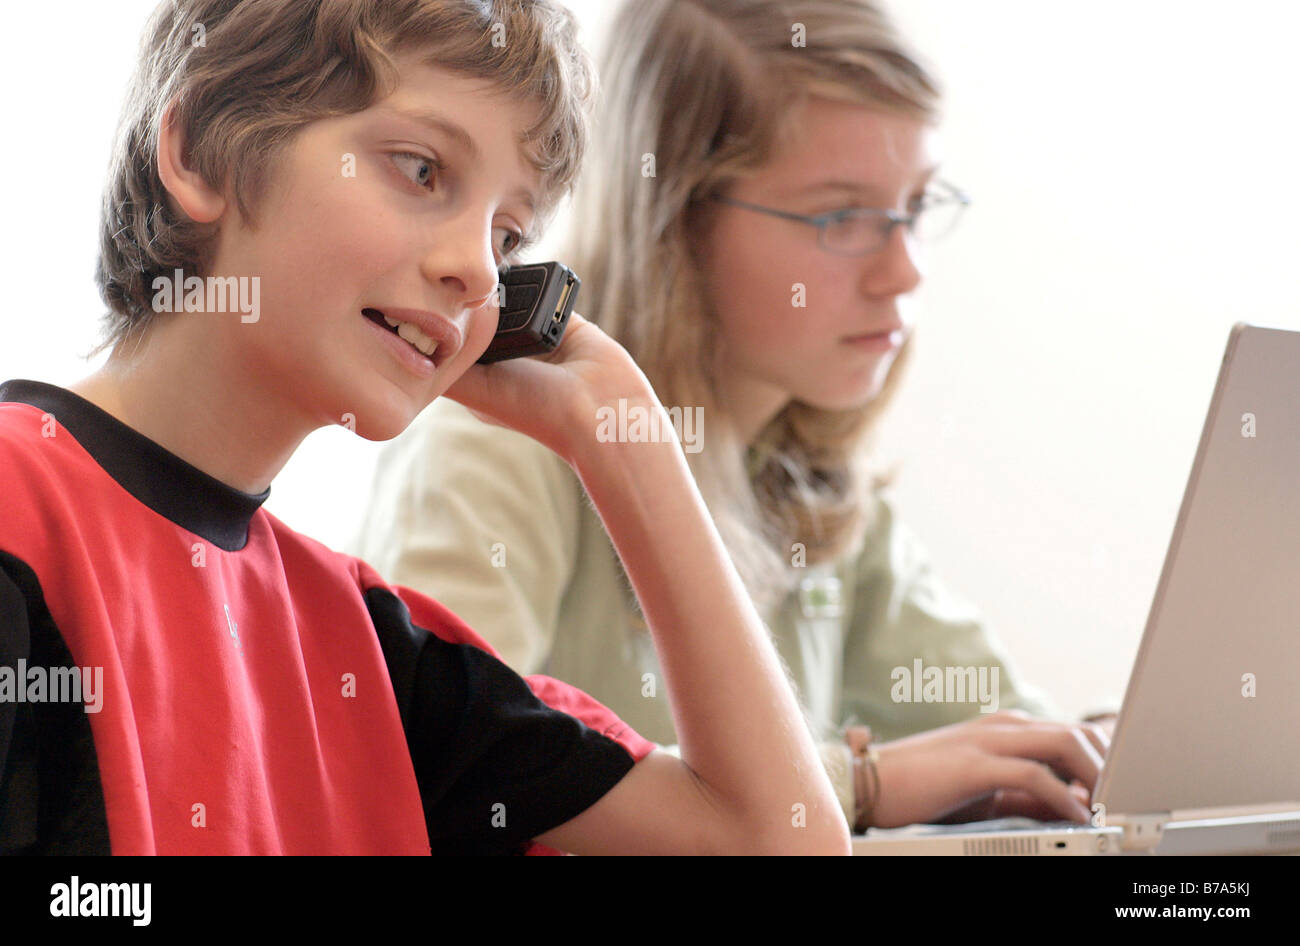 Young 10 year old boy, on cell phone and his 13 year old sister on a laptop Stock Photo